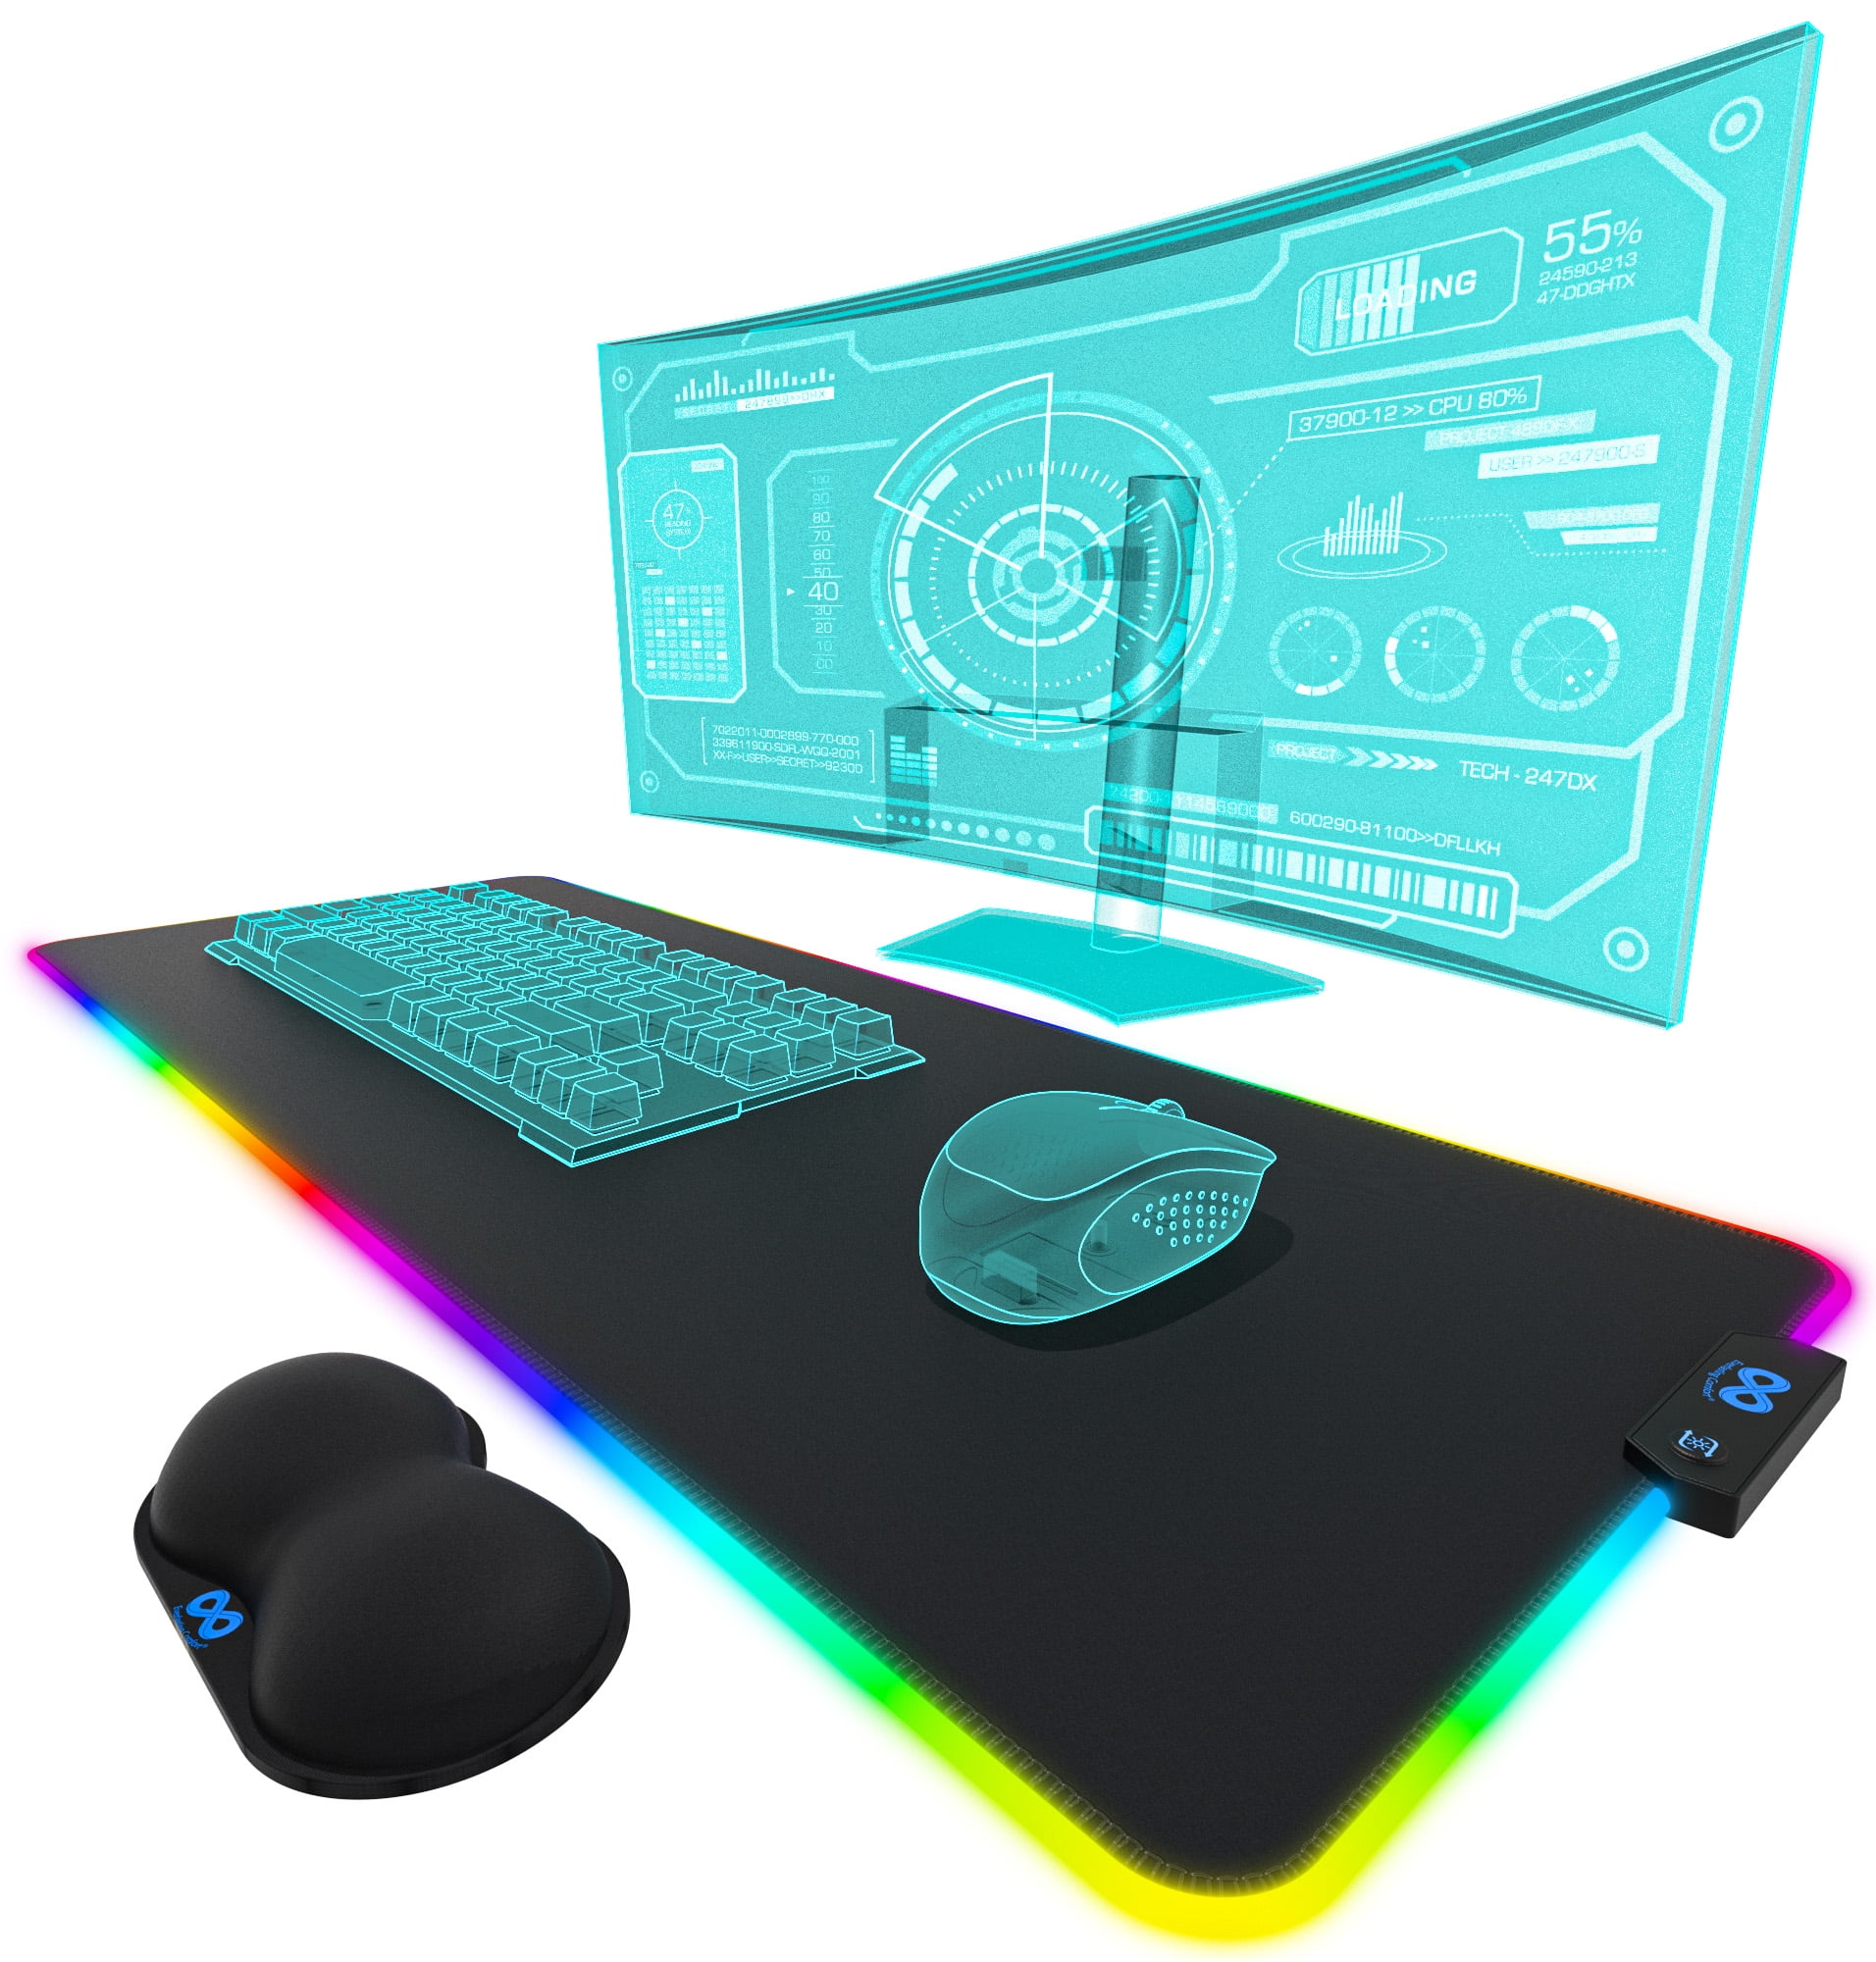 Everlasting Gaming Mouse Pad Oversized Mouse Pad with Wrist Support, 14 Color Modes, Waterproof Gaming Accessories (Black) - Walmart.com